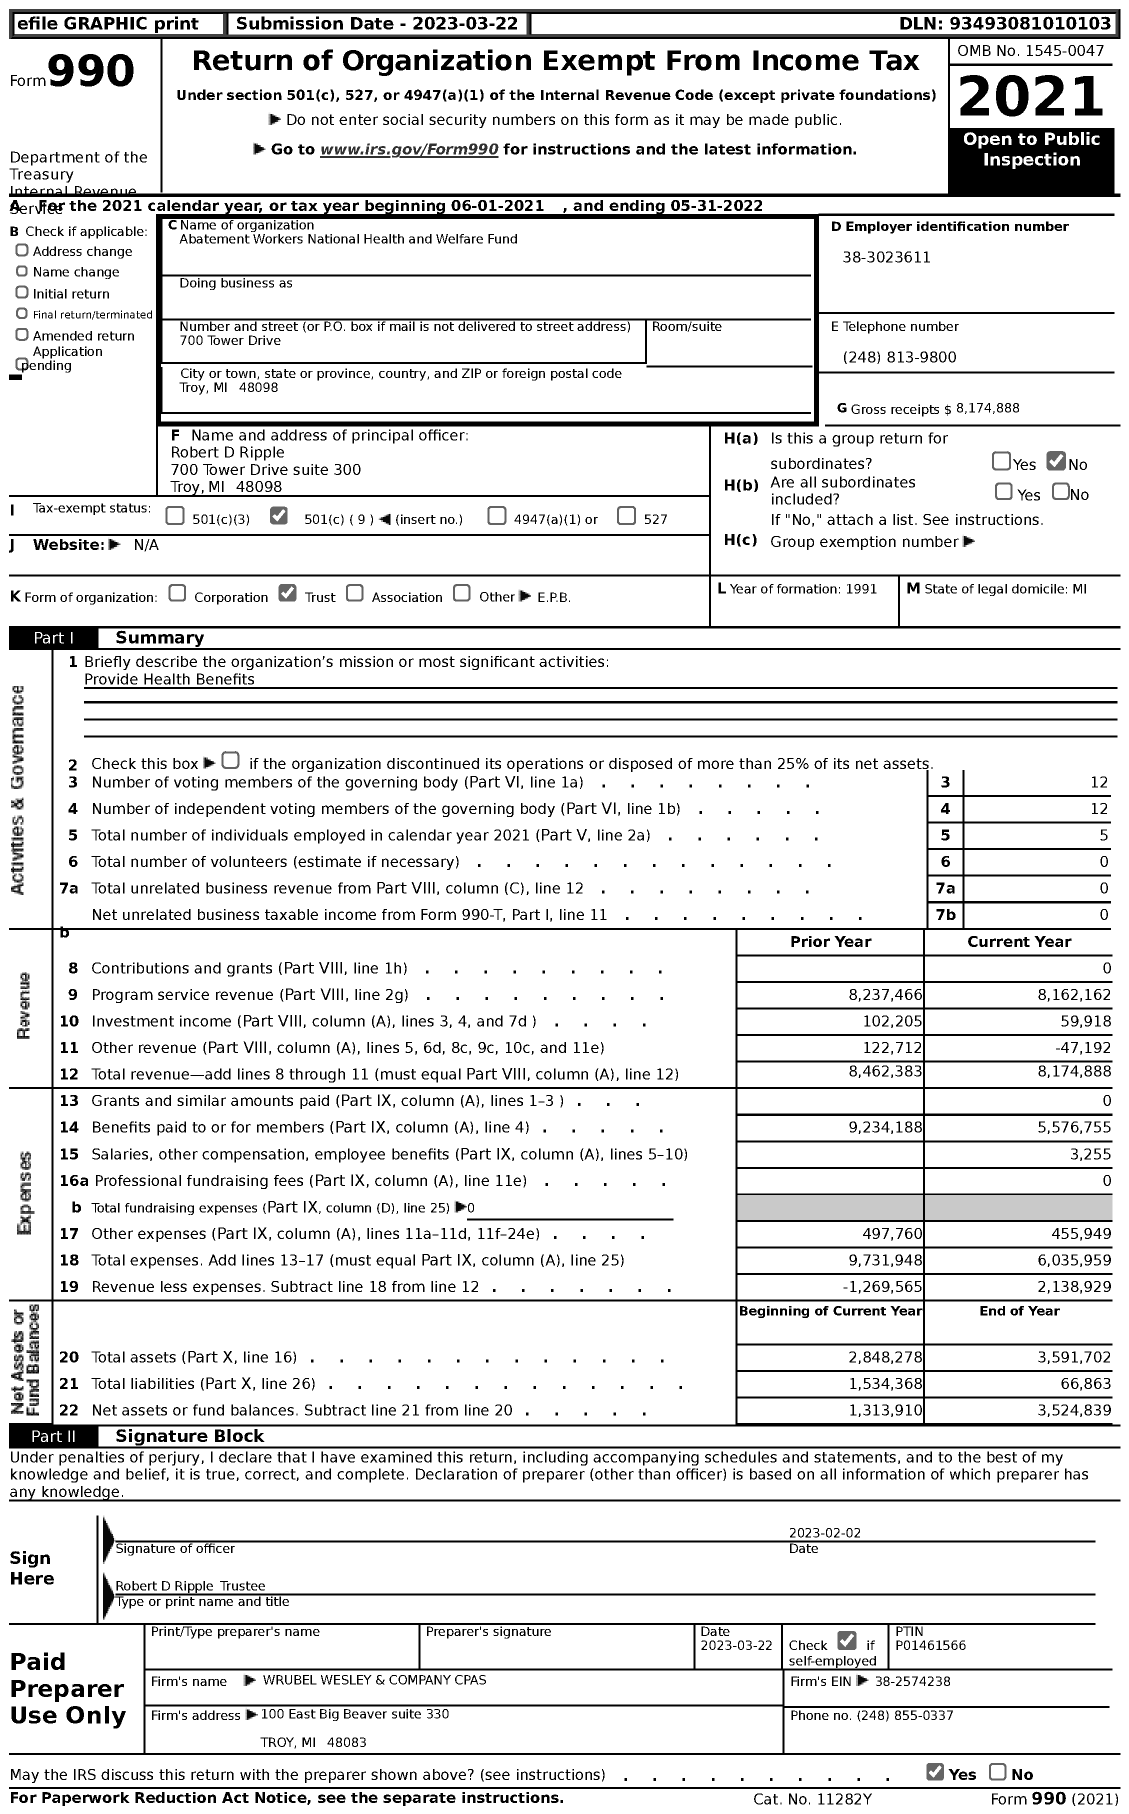 Image of first page of 2021 Form 990 for Abatement Workers National Health and Welfare Fund